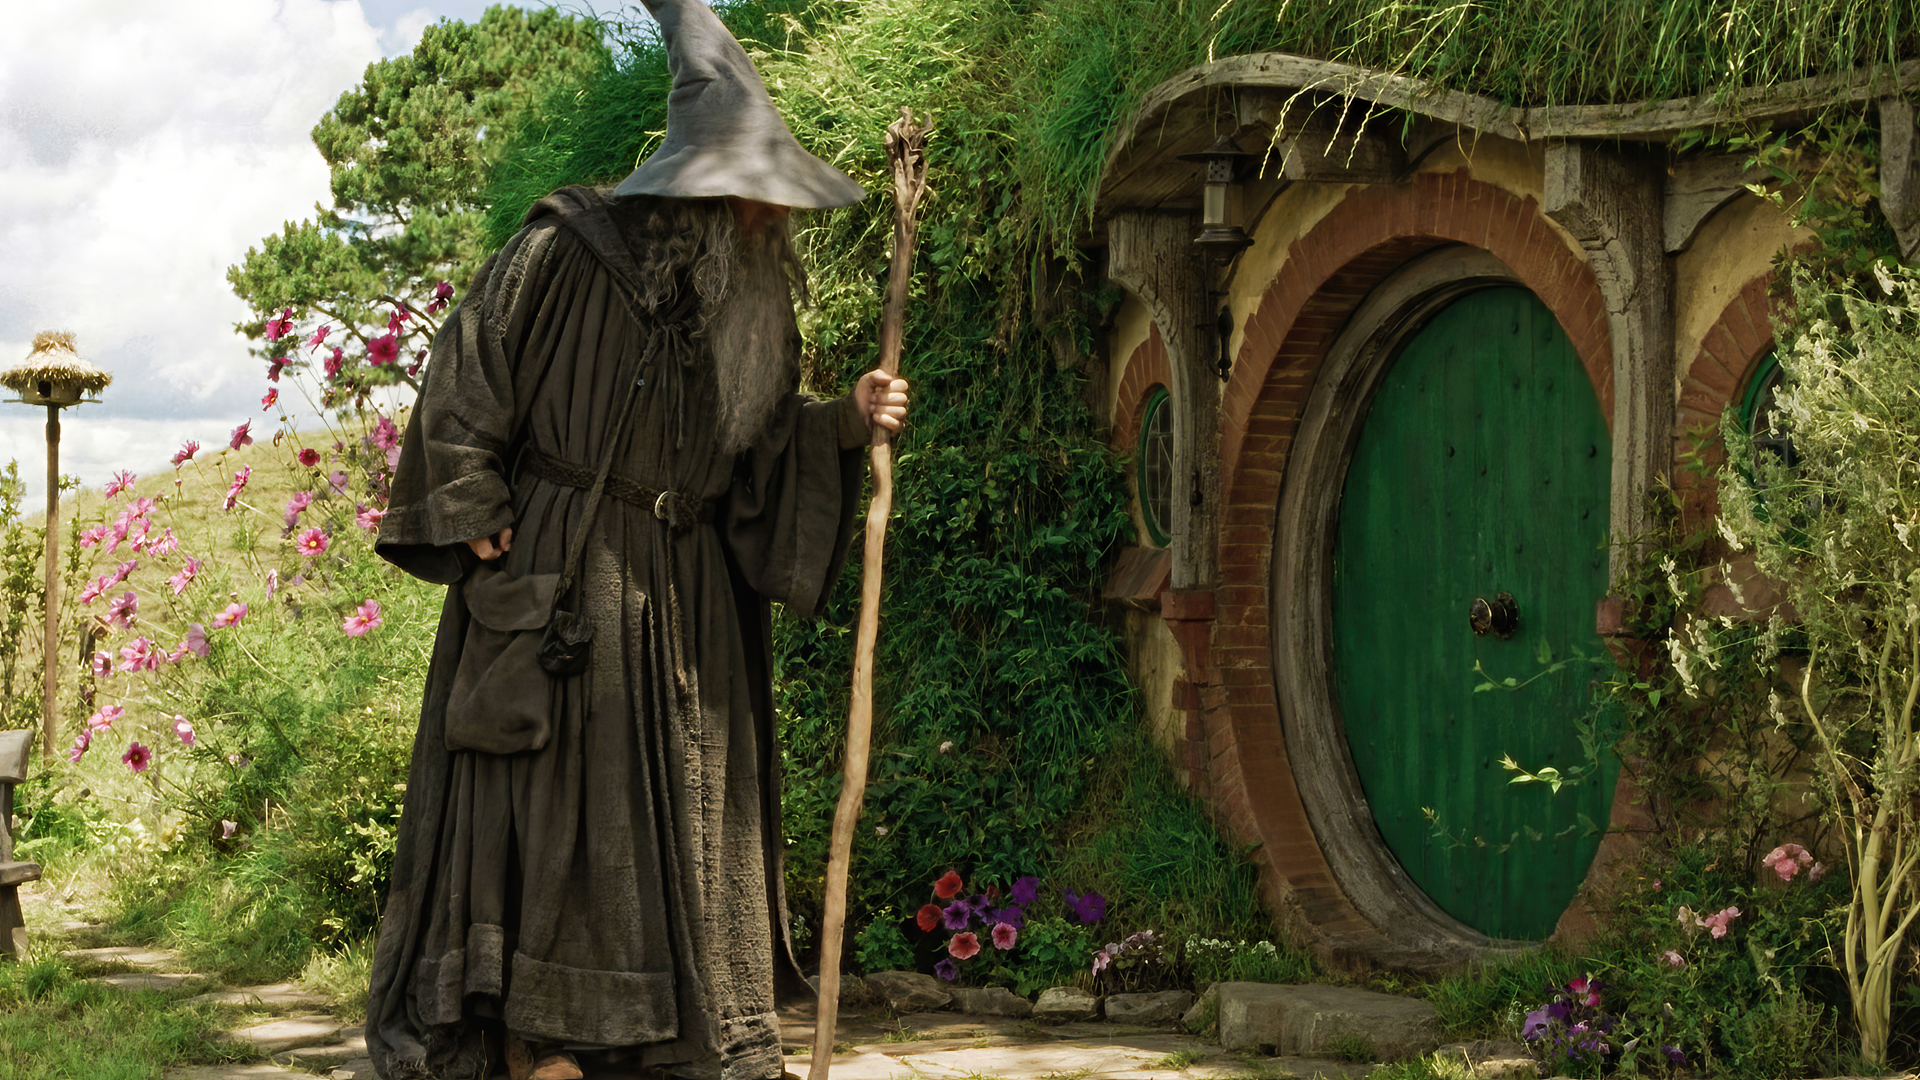 People 1920x1080 The Lord of the Rings: The Fellowship of the Ring Gandalf movies film stills Ian McKellen door The Shire wizard's hat staff Bag End house plants wizard flowers J. R. R. Tolkien